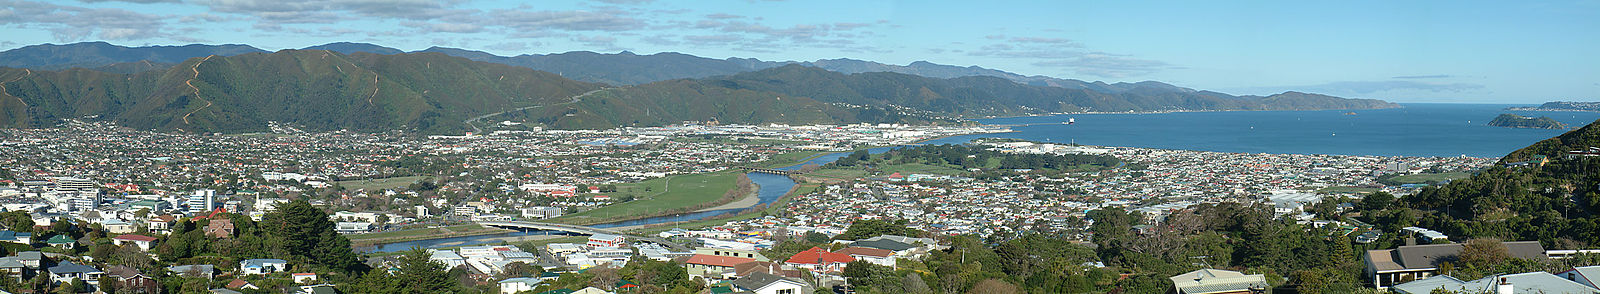 Lower Hutt from Normandale, in the western hills. On the right is the entrance to Wellington Harbour, with Matiu / Somes Island beneath. The Hutt River snakes from the right background to the left mid-ground, entering the harbour between the suburbs of Seaview and Petone. The Wainuiomata Hill Road climbs the hills in the centre background (the track in the middle of the left half of the background is a firebreak, not a road). At the foot of the Wainuiomata Hill Road is the Gracefield industrial area.